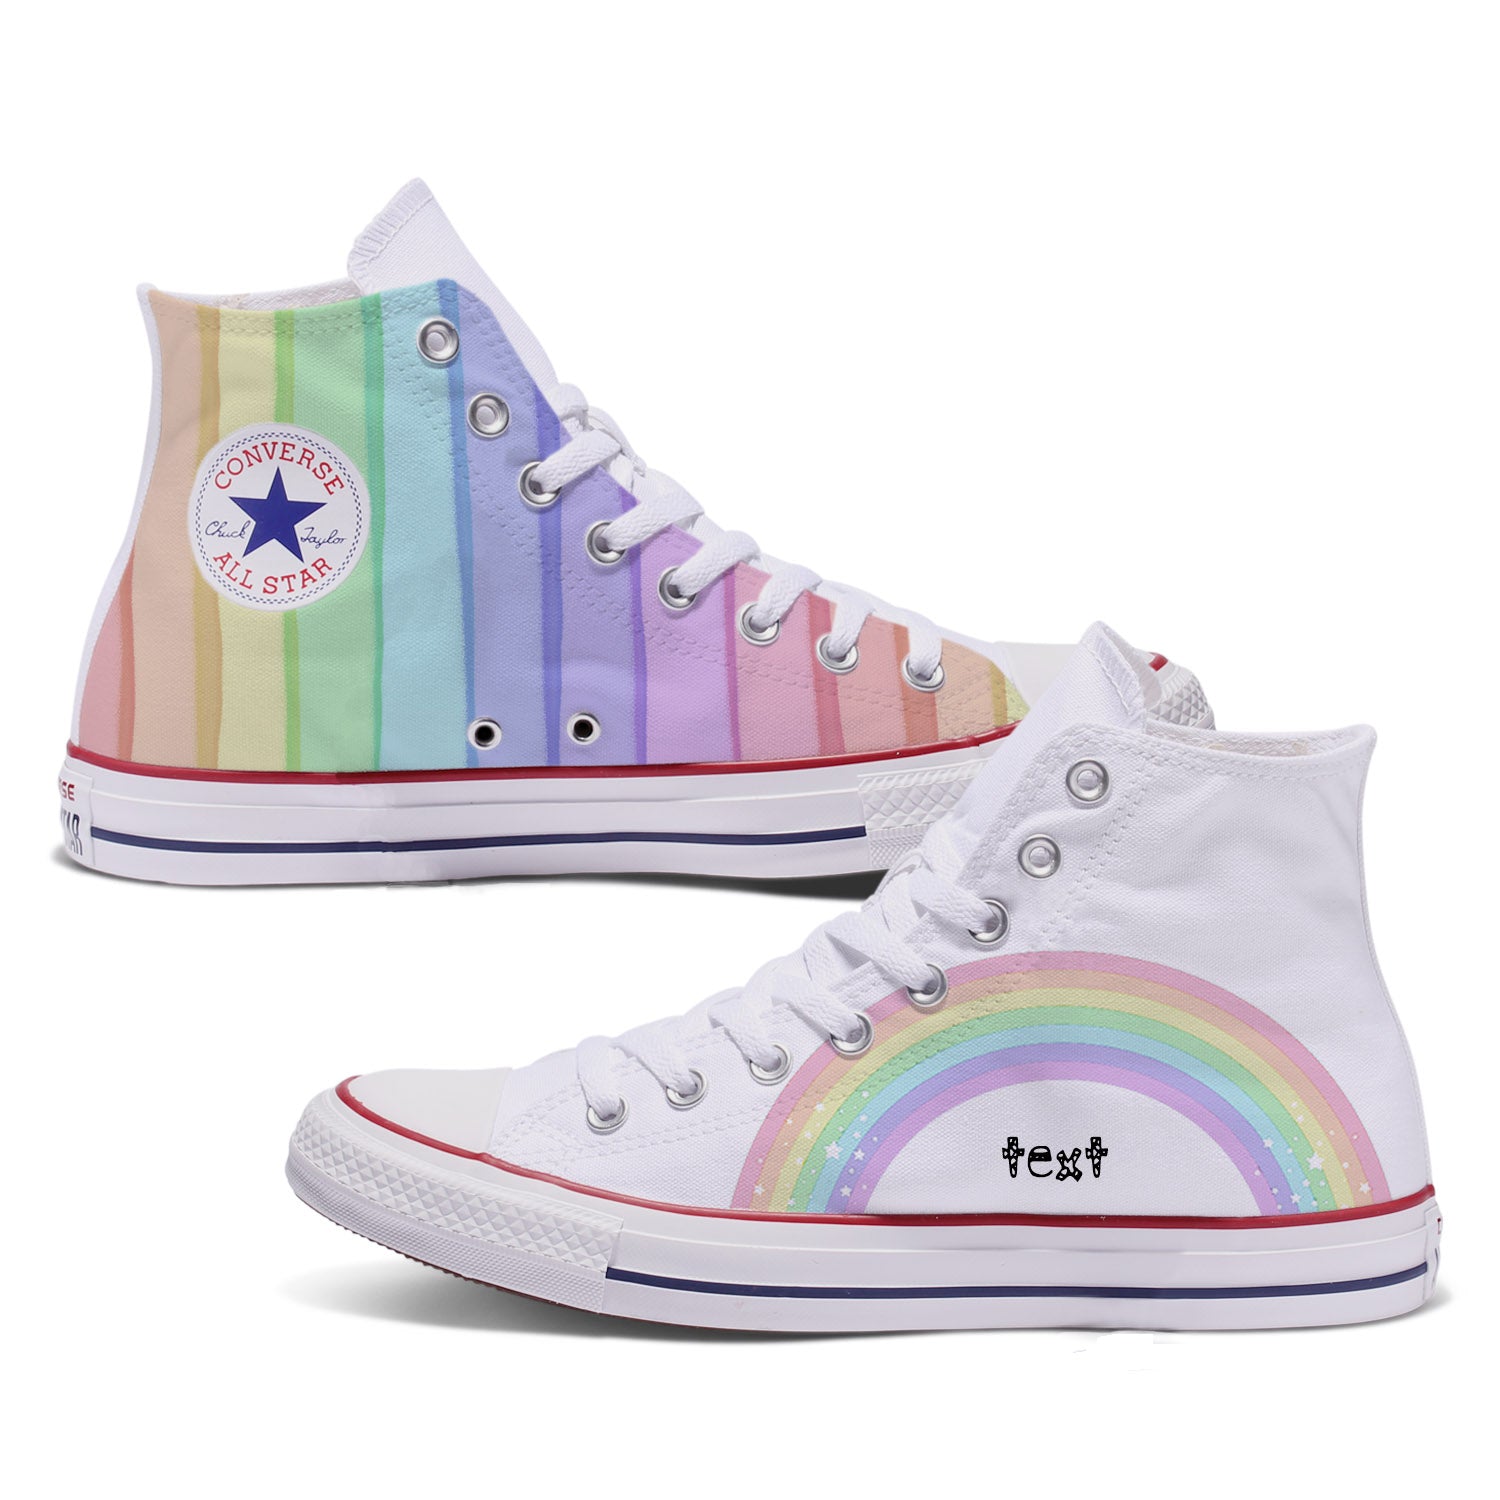 customized converse high tops